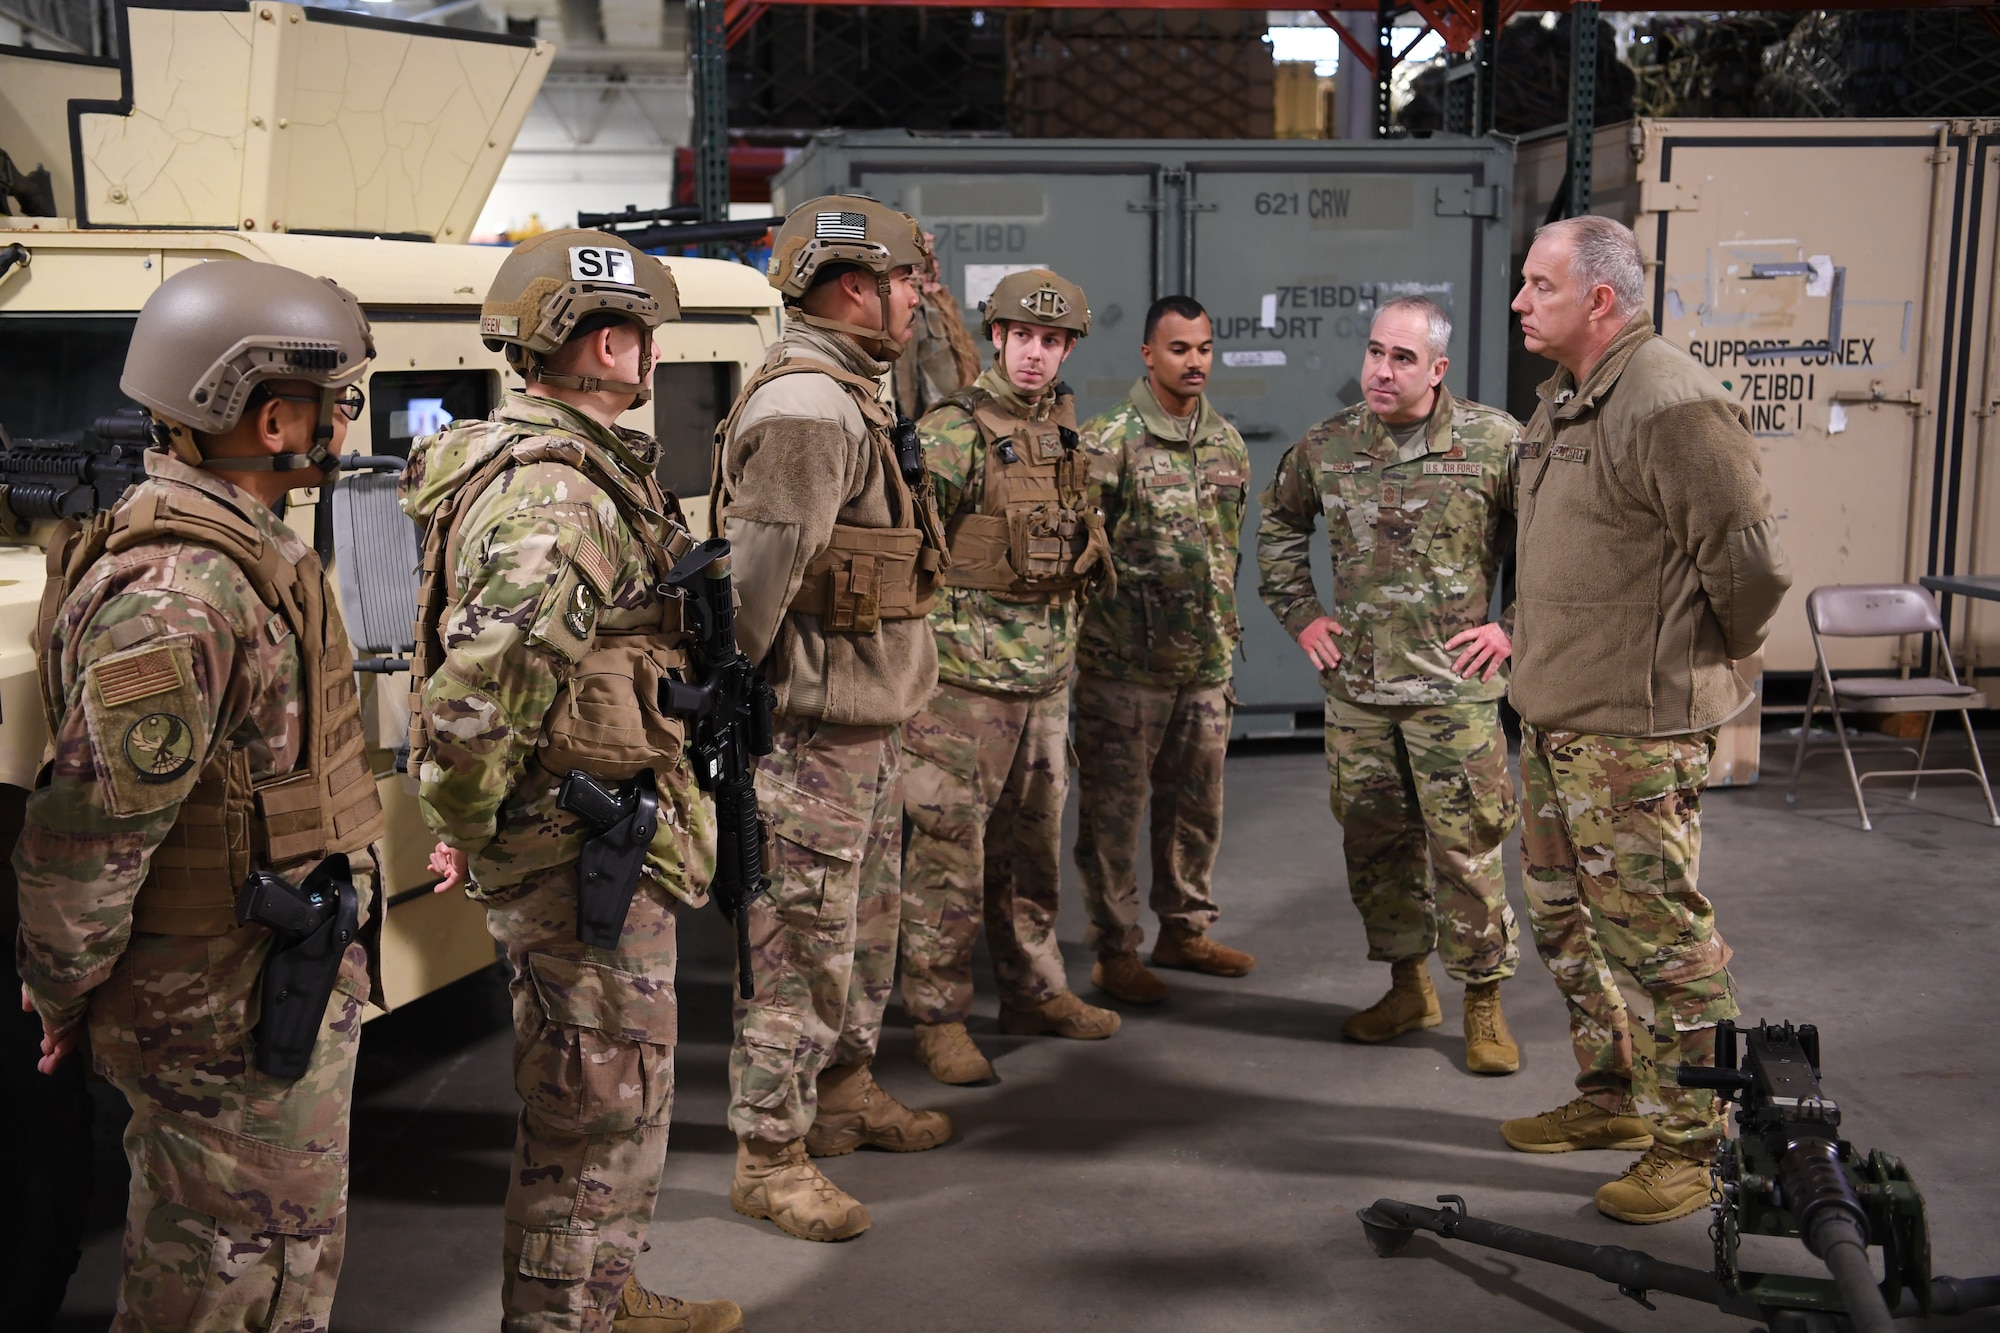 Maj. Gen. John Gordy (right), U.S. Air Force Expeditionary Center commander, speaks with Airmen from the 621st Contingency Response Wing at the Global Deployment Readiness Center, Joint Base McGuire-Dix-Lakehurst, New Jersey Dec. 17, 2019. Gordy along with Chief Master Sgt. Kristopher Berg, USAF EC command chief, spent the day learning about the CRW mission. (U.S. Air Force photo by Tech. Sgt. Luther Mitchell)